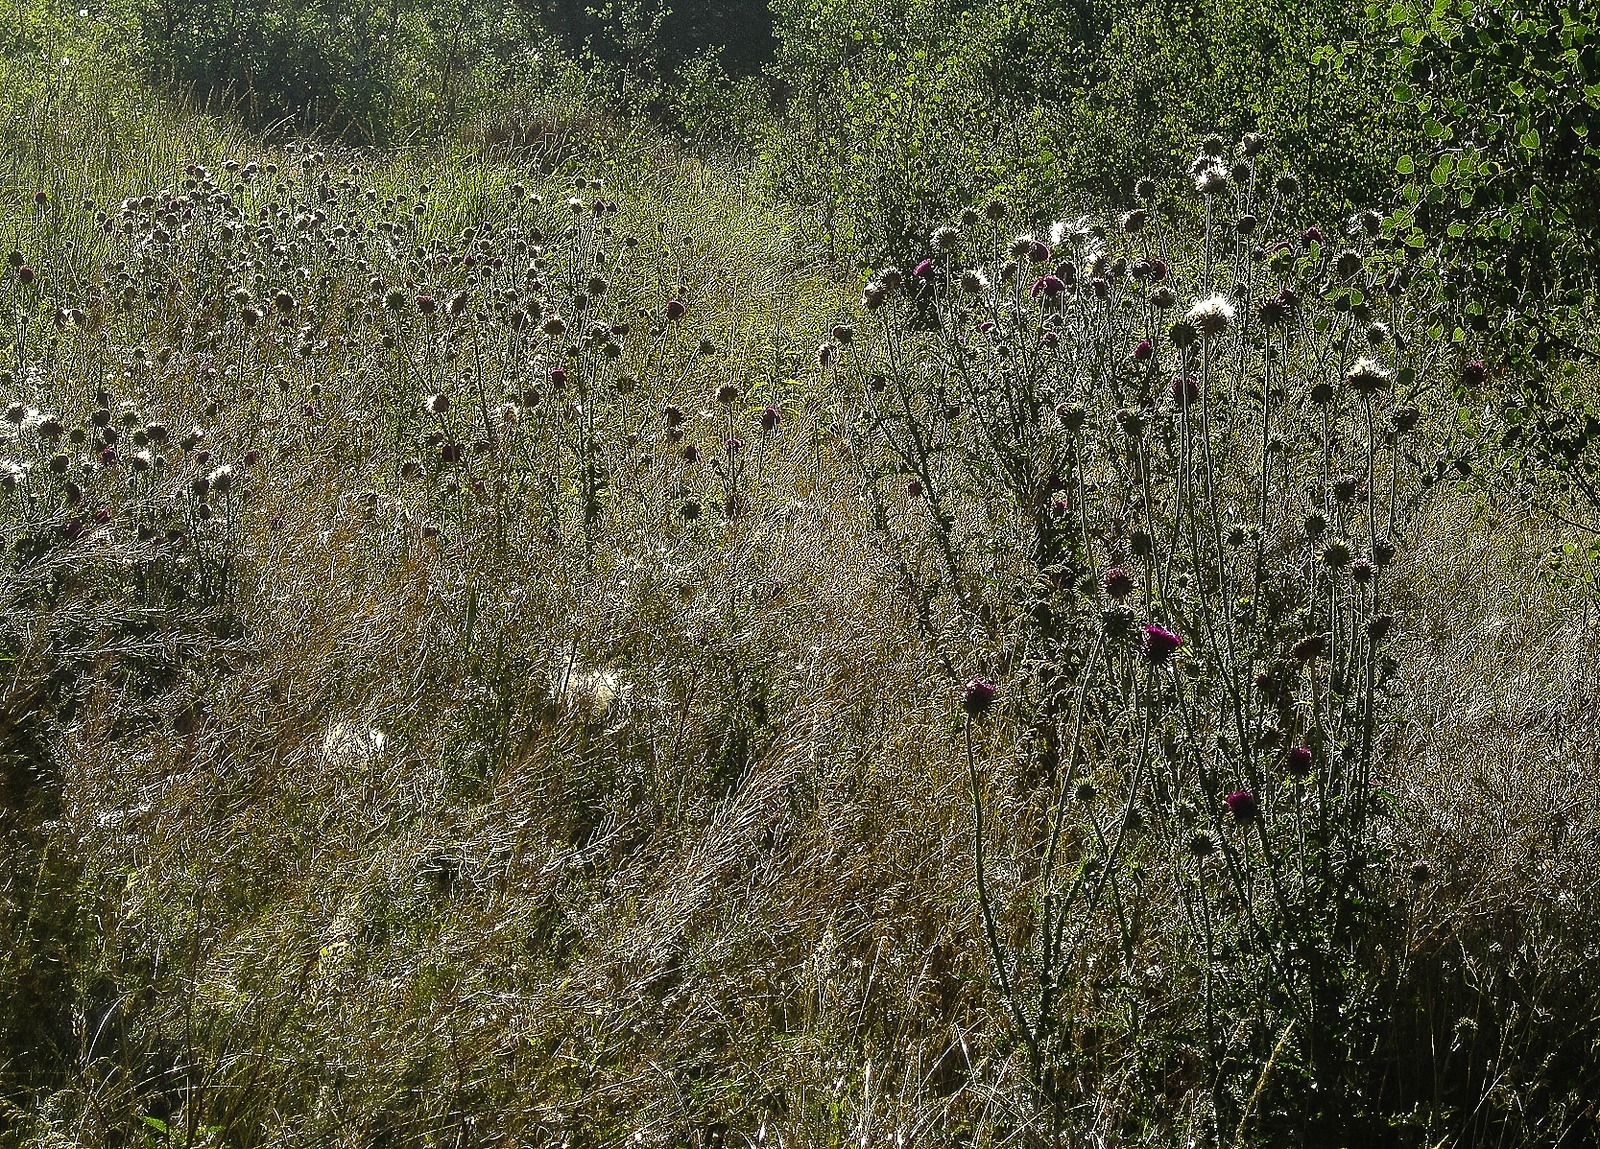 Musk thistle stand before treatment. Photo by Susan Marsh